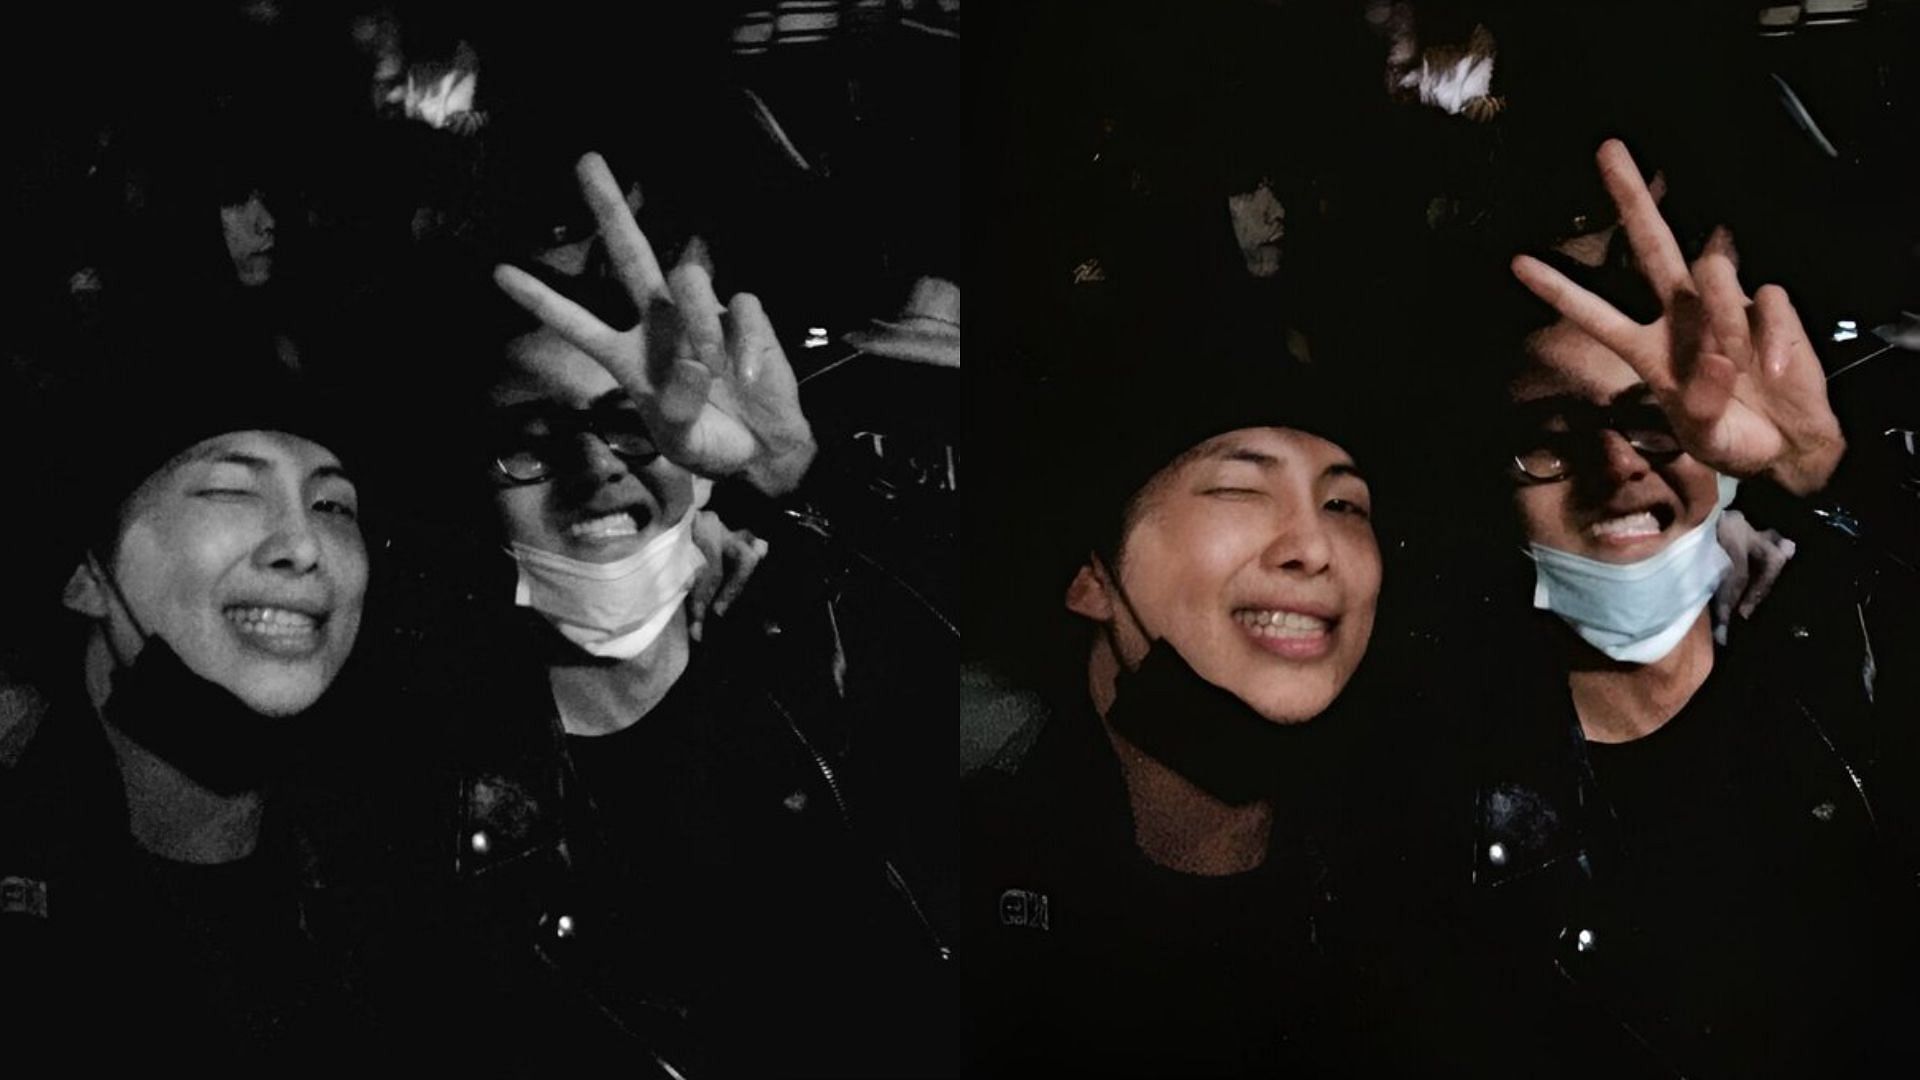 BTS&#039; RM and V spent time together at Lil Uzi Vert&lsquo;s afterparty (Image via X/ @archivefortae @Taehyungimpact